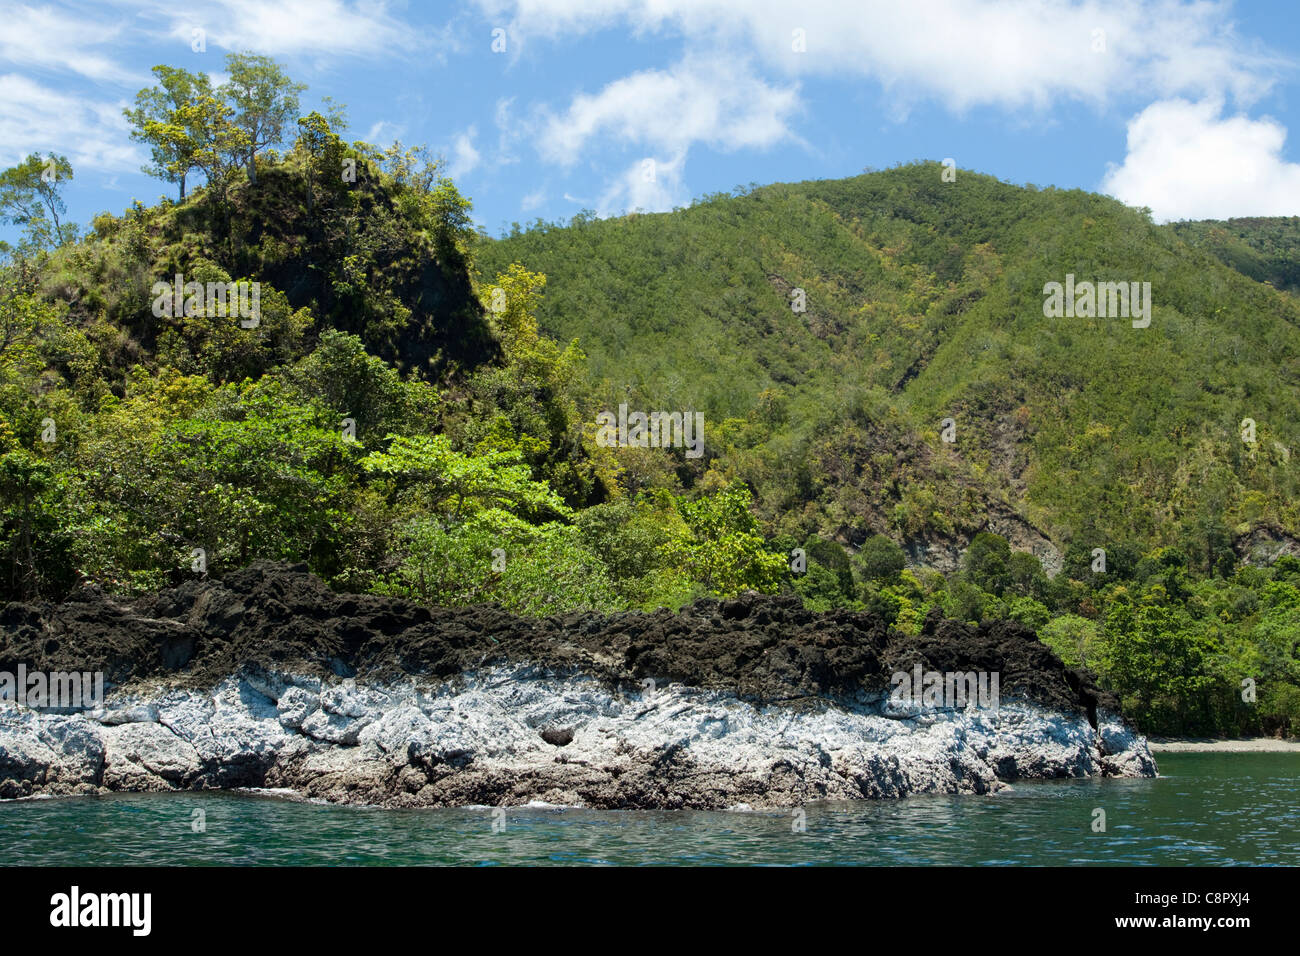 Shoreline in Ambon, Indonesia showing lush rainforest and Volcanic rock. Stock Photo